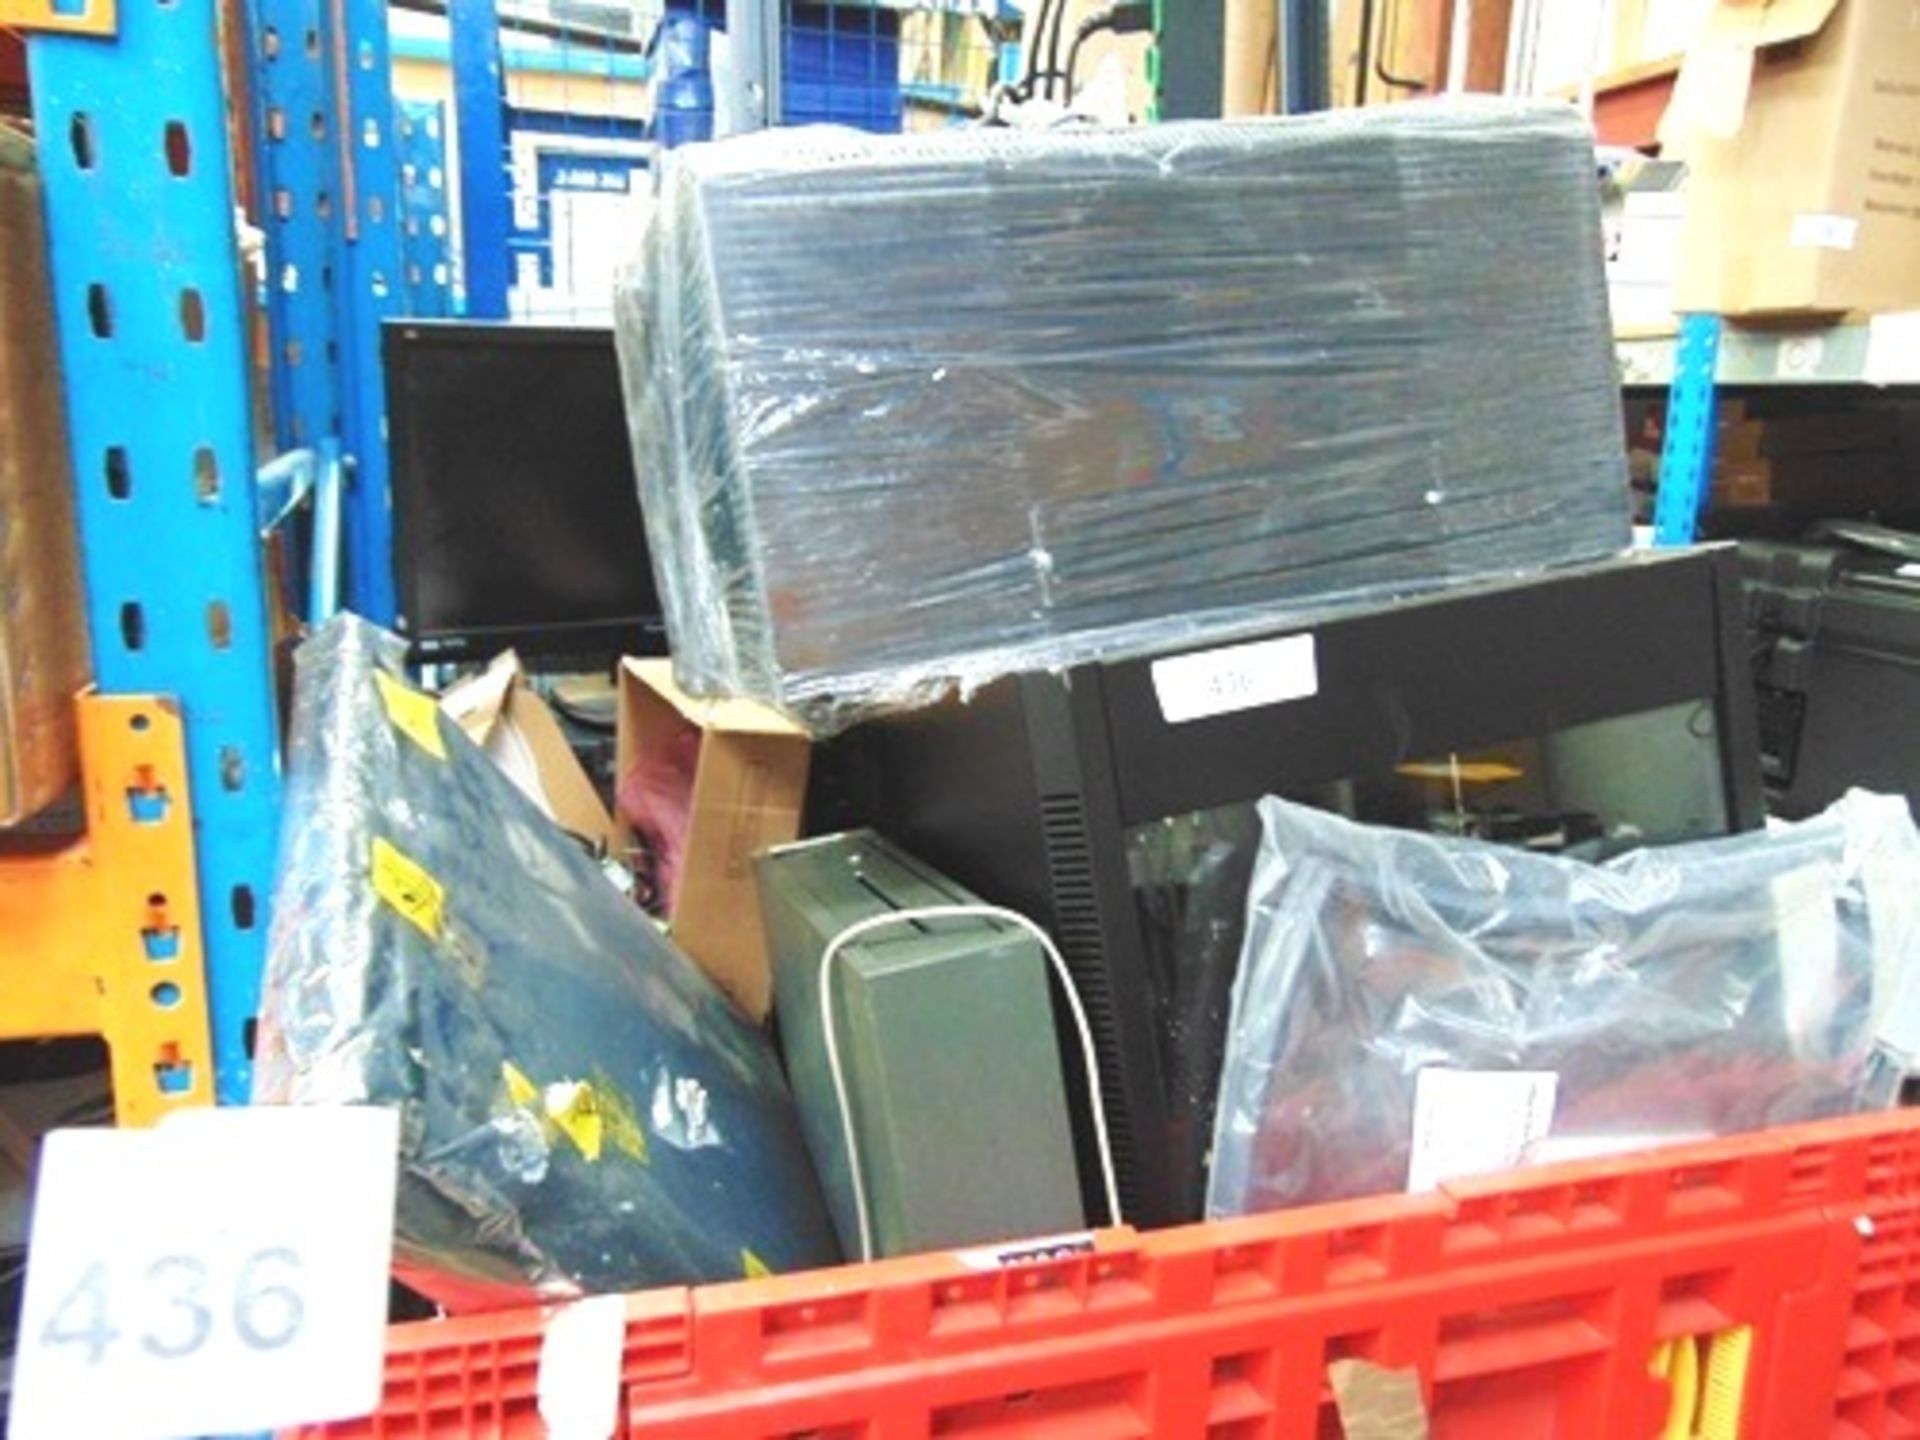 A magnum of electrical equipment including Startec wall mounted rack units, a DC power